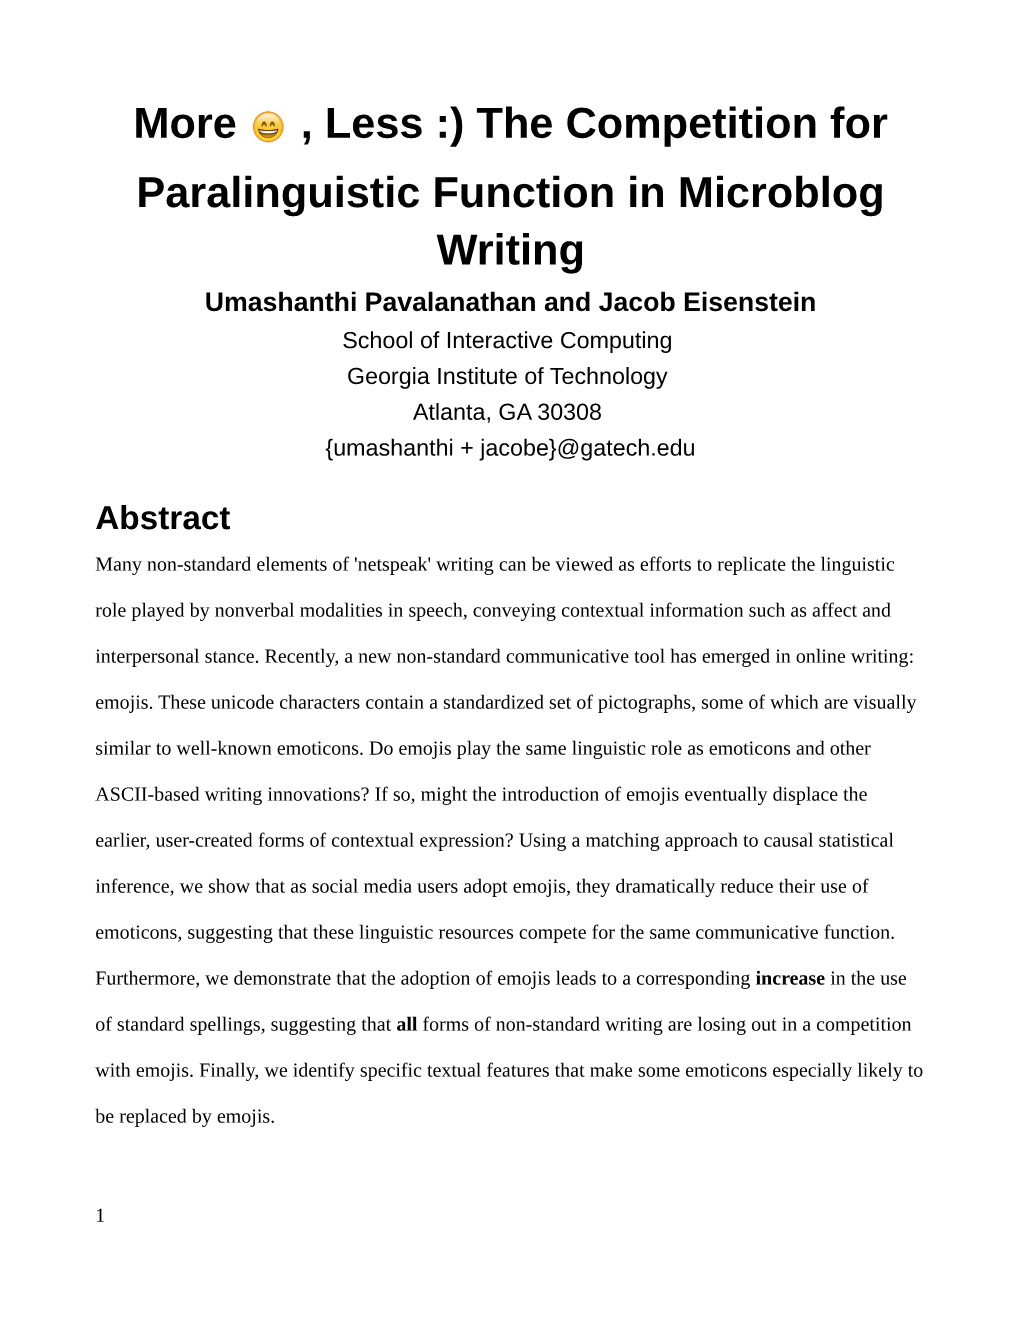 The Competition for Paralinguistic Function in Microblog Writing